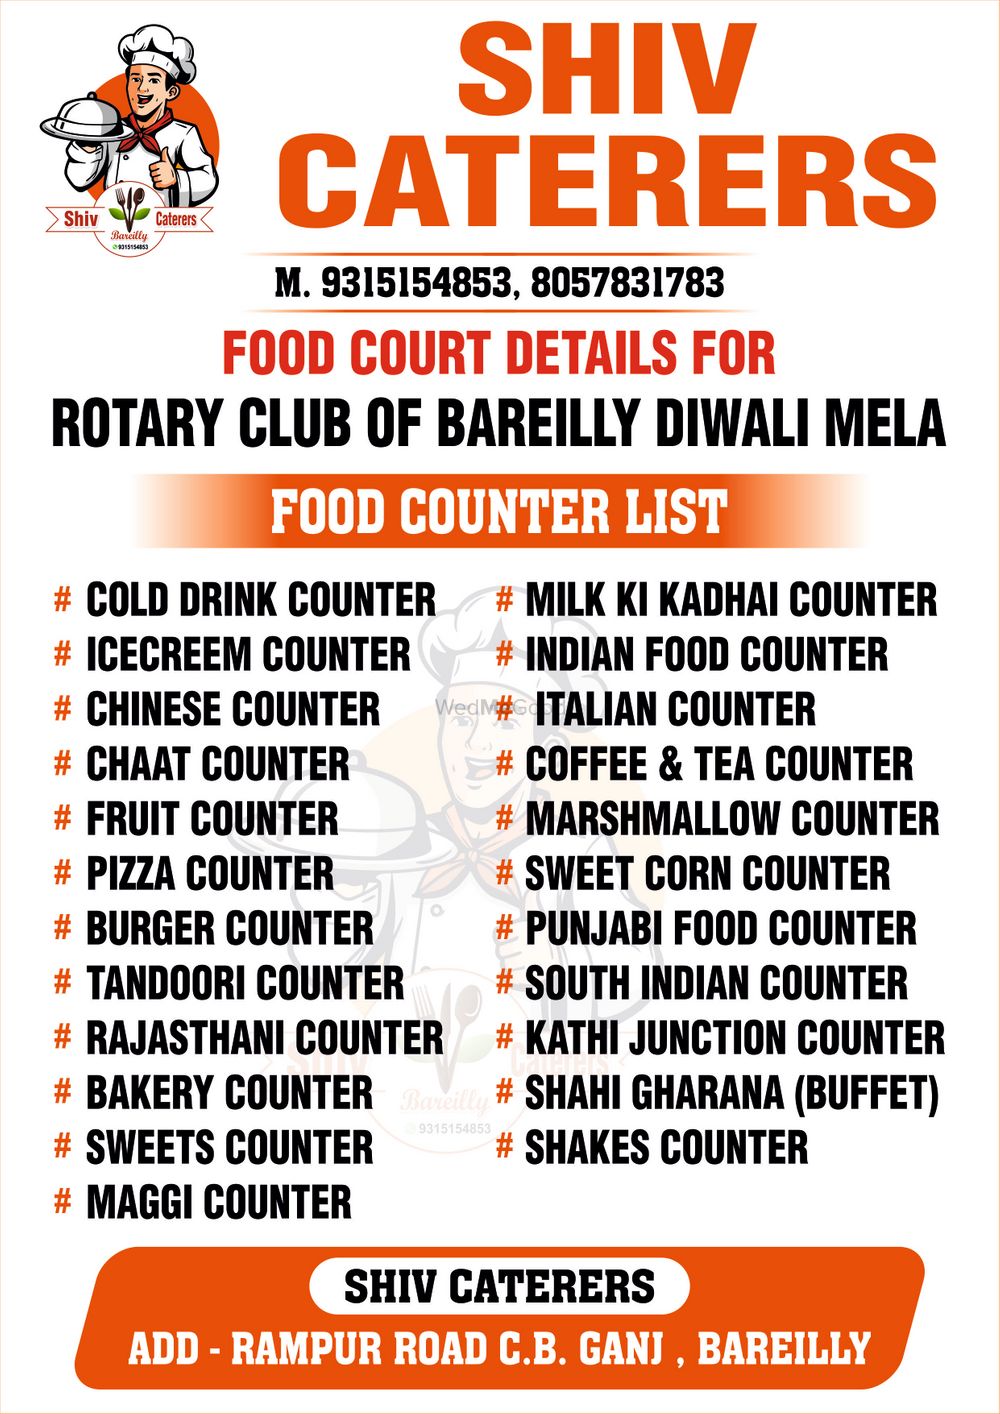 Photo From rotery club diwali mela - By Shiv Caterers